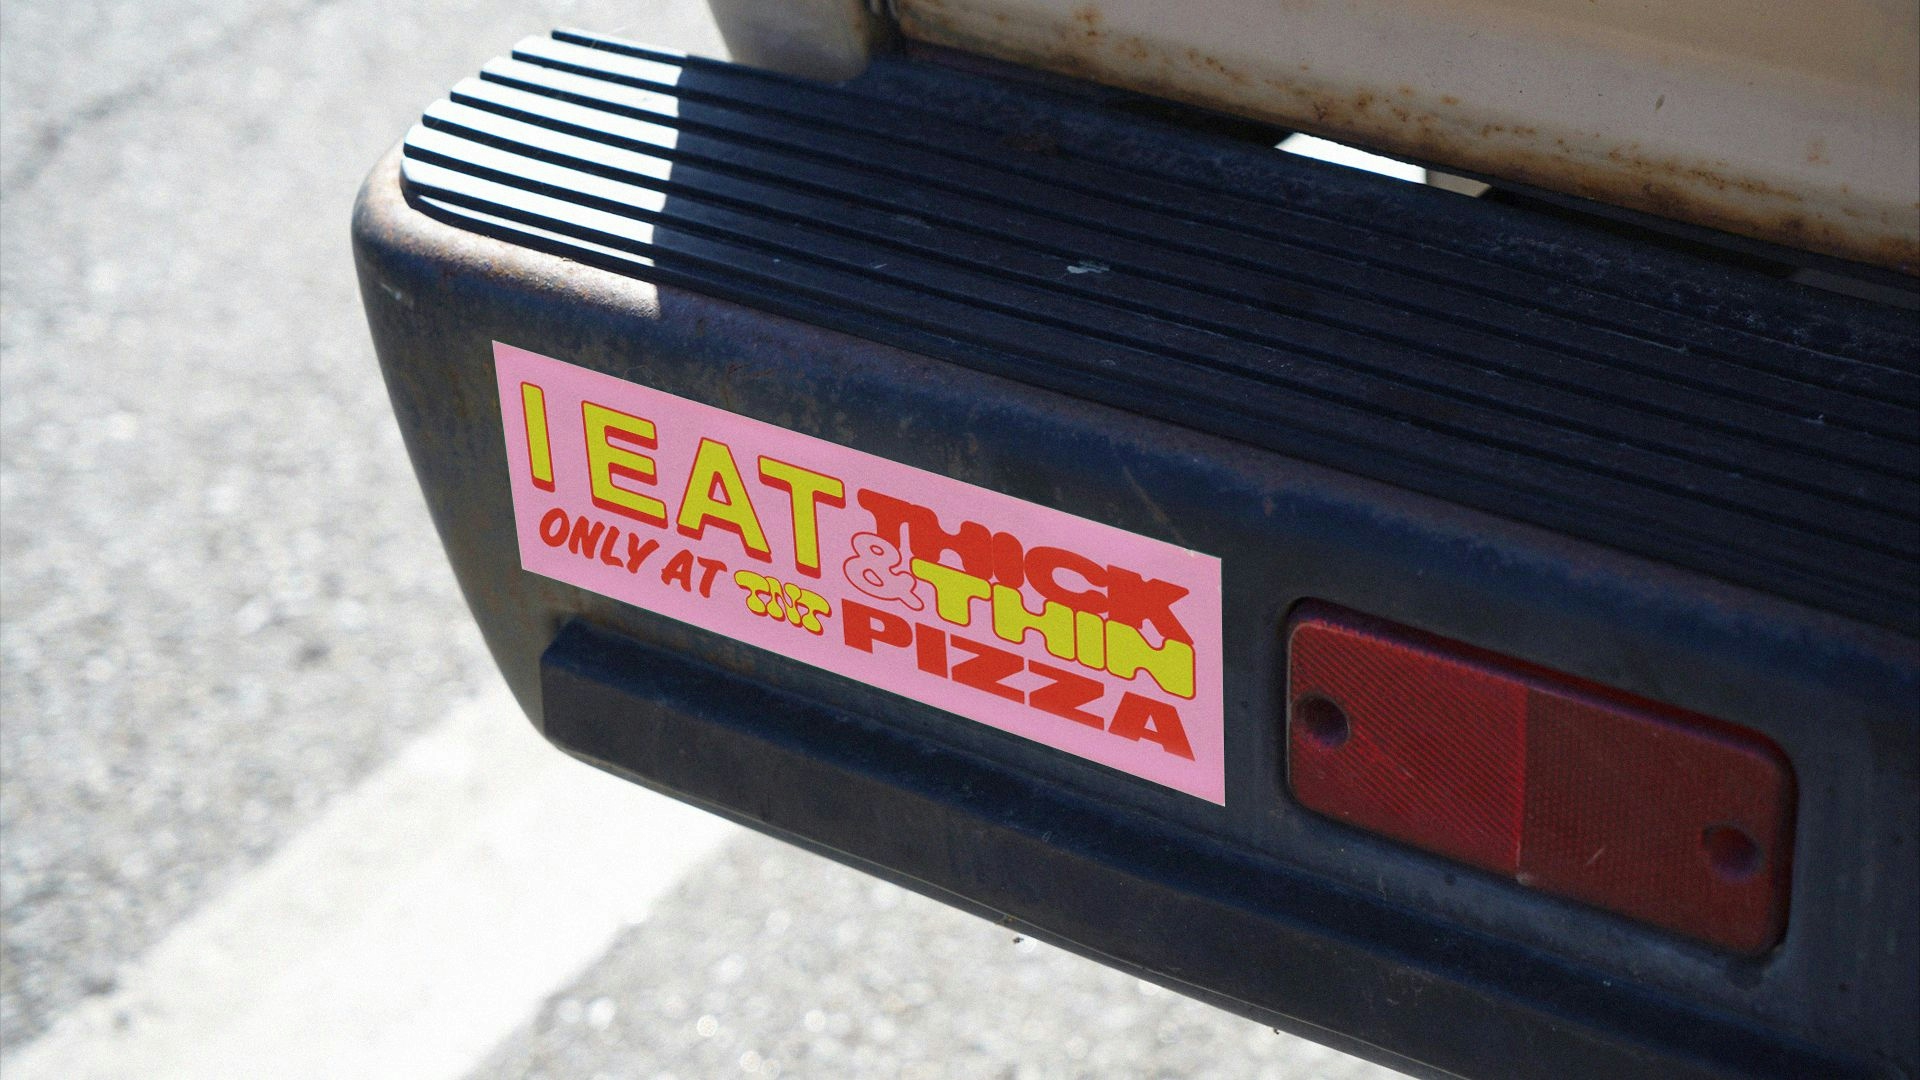 TNT Pizza pink bumper sticker from the Brand Identity & Packaging project